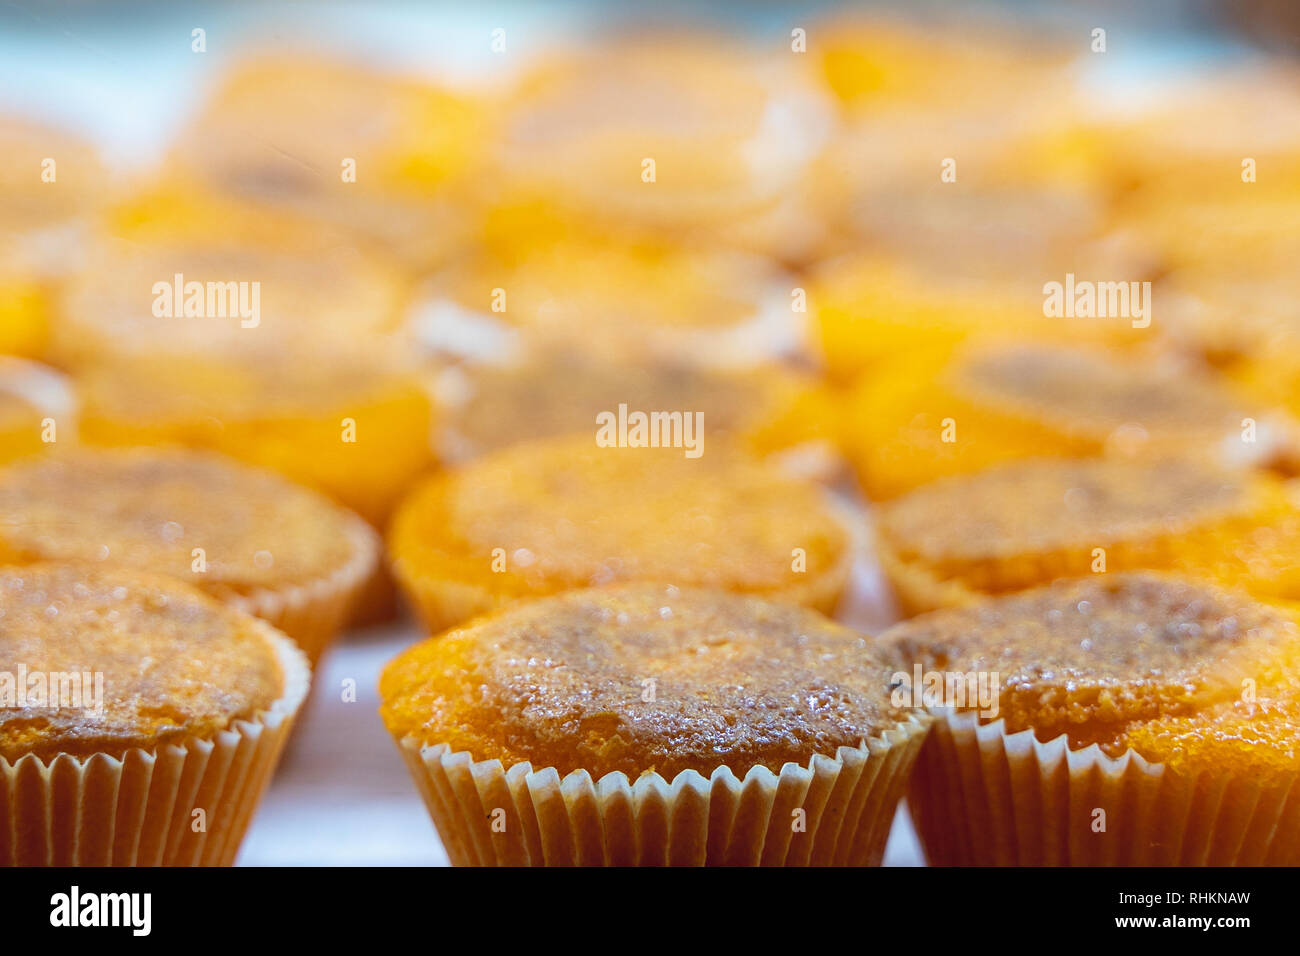 Delicious orange yellow bean cakes / muffins from Lisbon Portugal Stock Photo